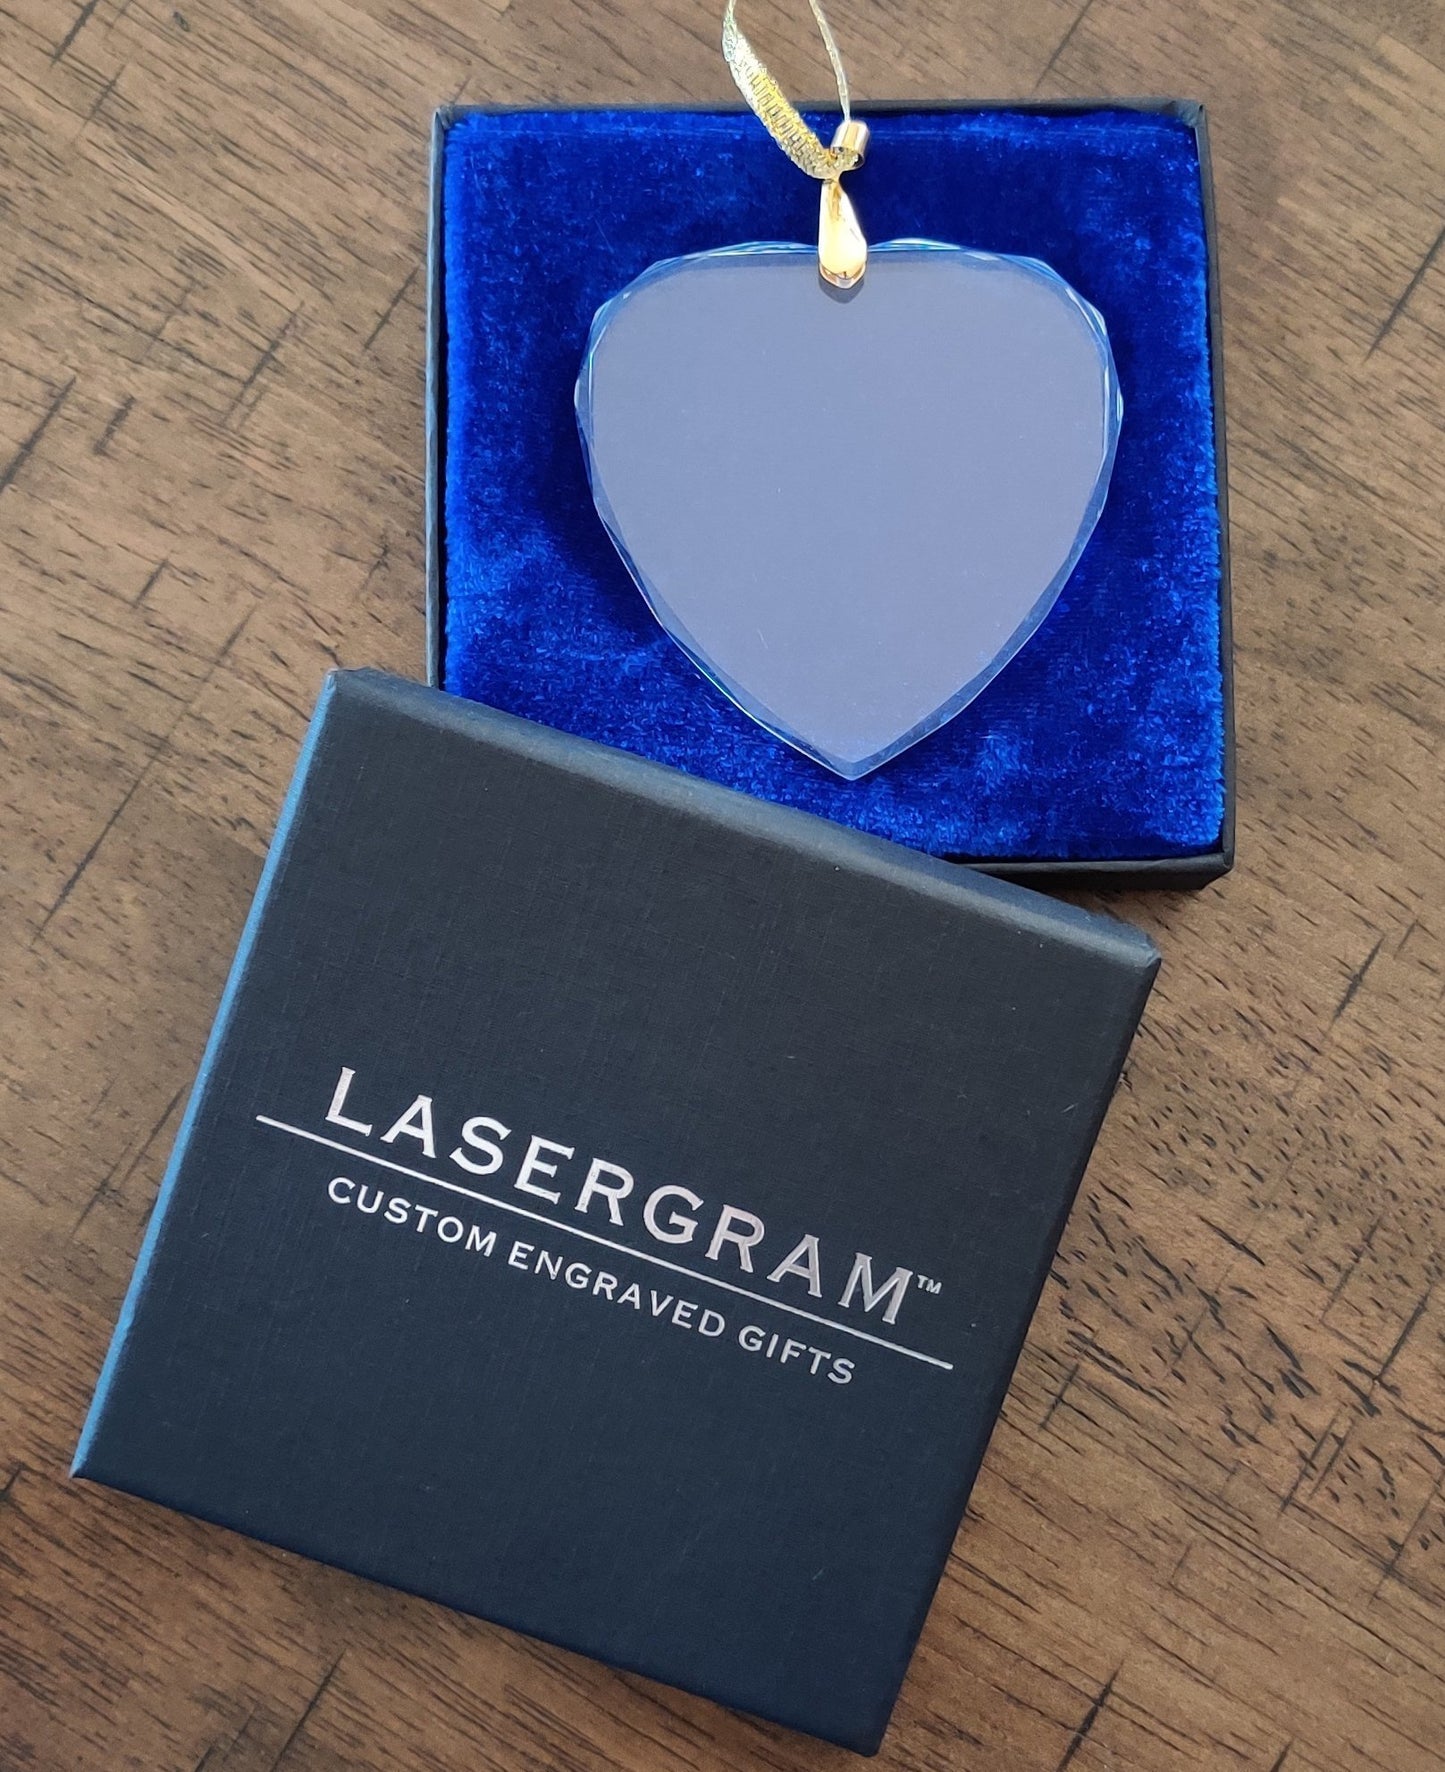 LaserGram Christmas Ornament, Golf Ball, Personalized Engraving Included (Heart Shape)